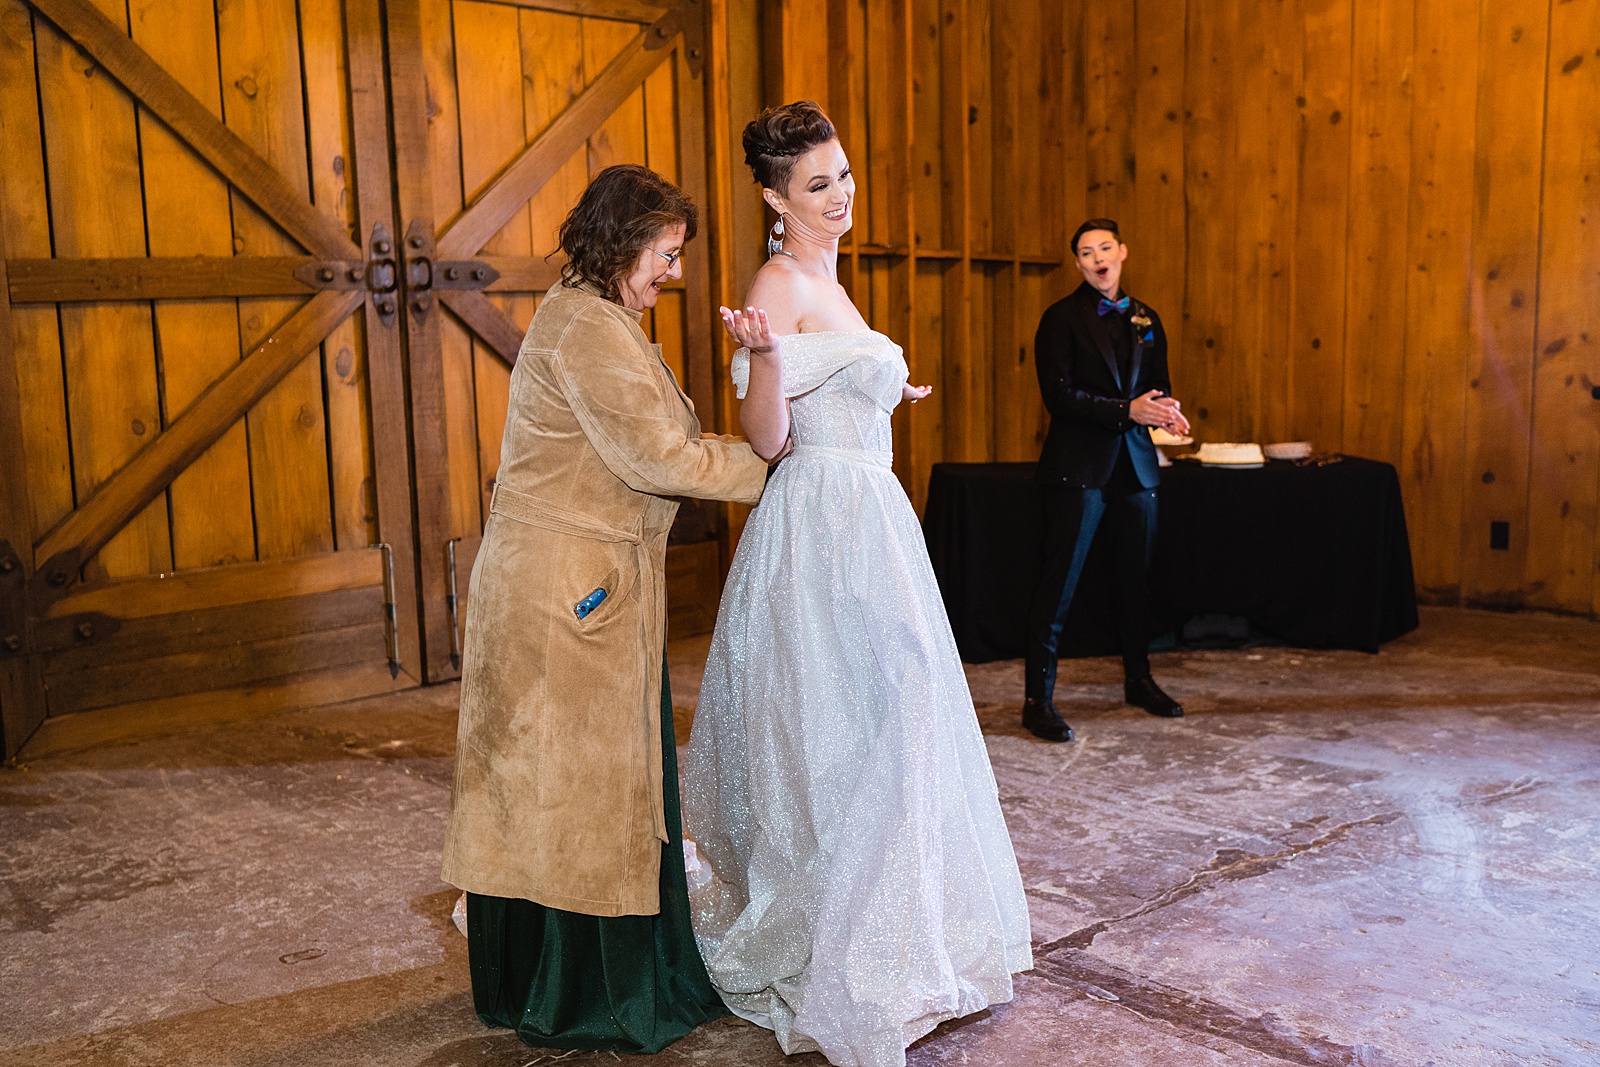 Bride changes out of wedding dress into wedding suit before first dance at Mortimer Farms wedding reception by Prescott wedding photographer PMA Photography